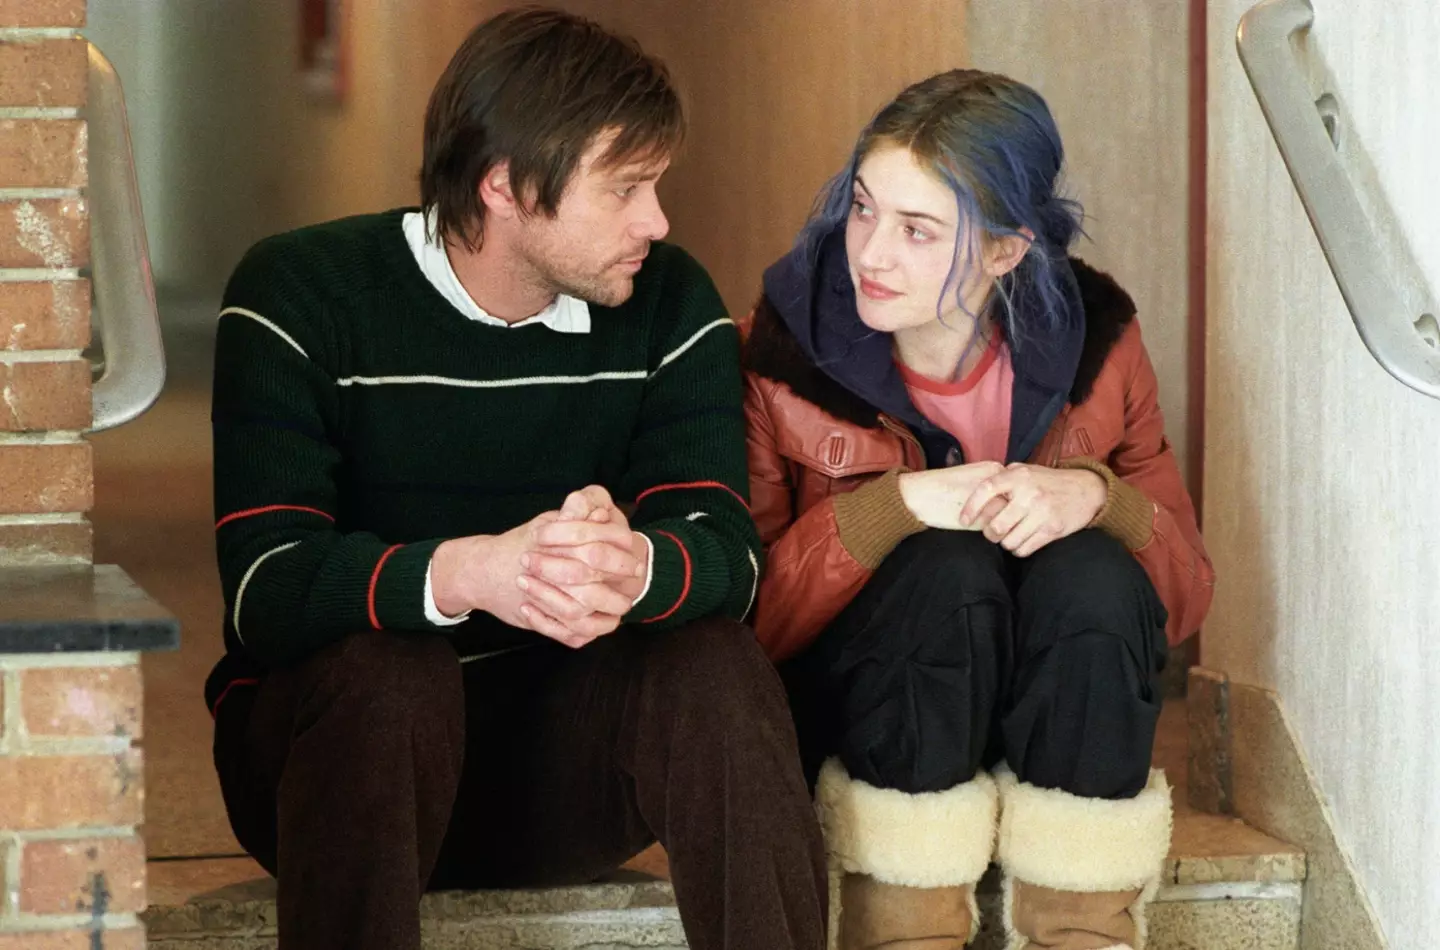 Jim Carrey and Kate Winslet in Eternal Sunshine of the Spotless Mind (2004).